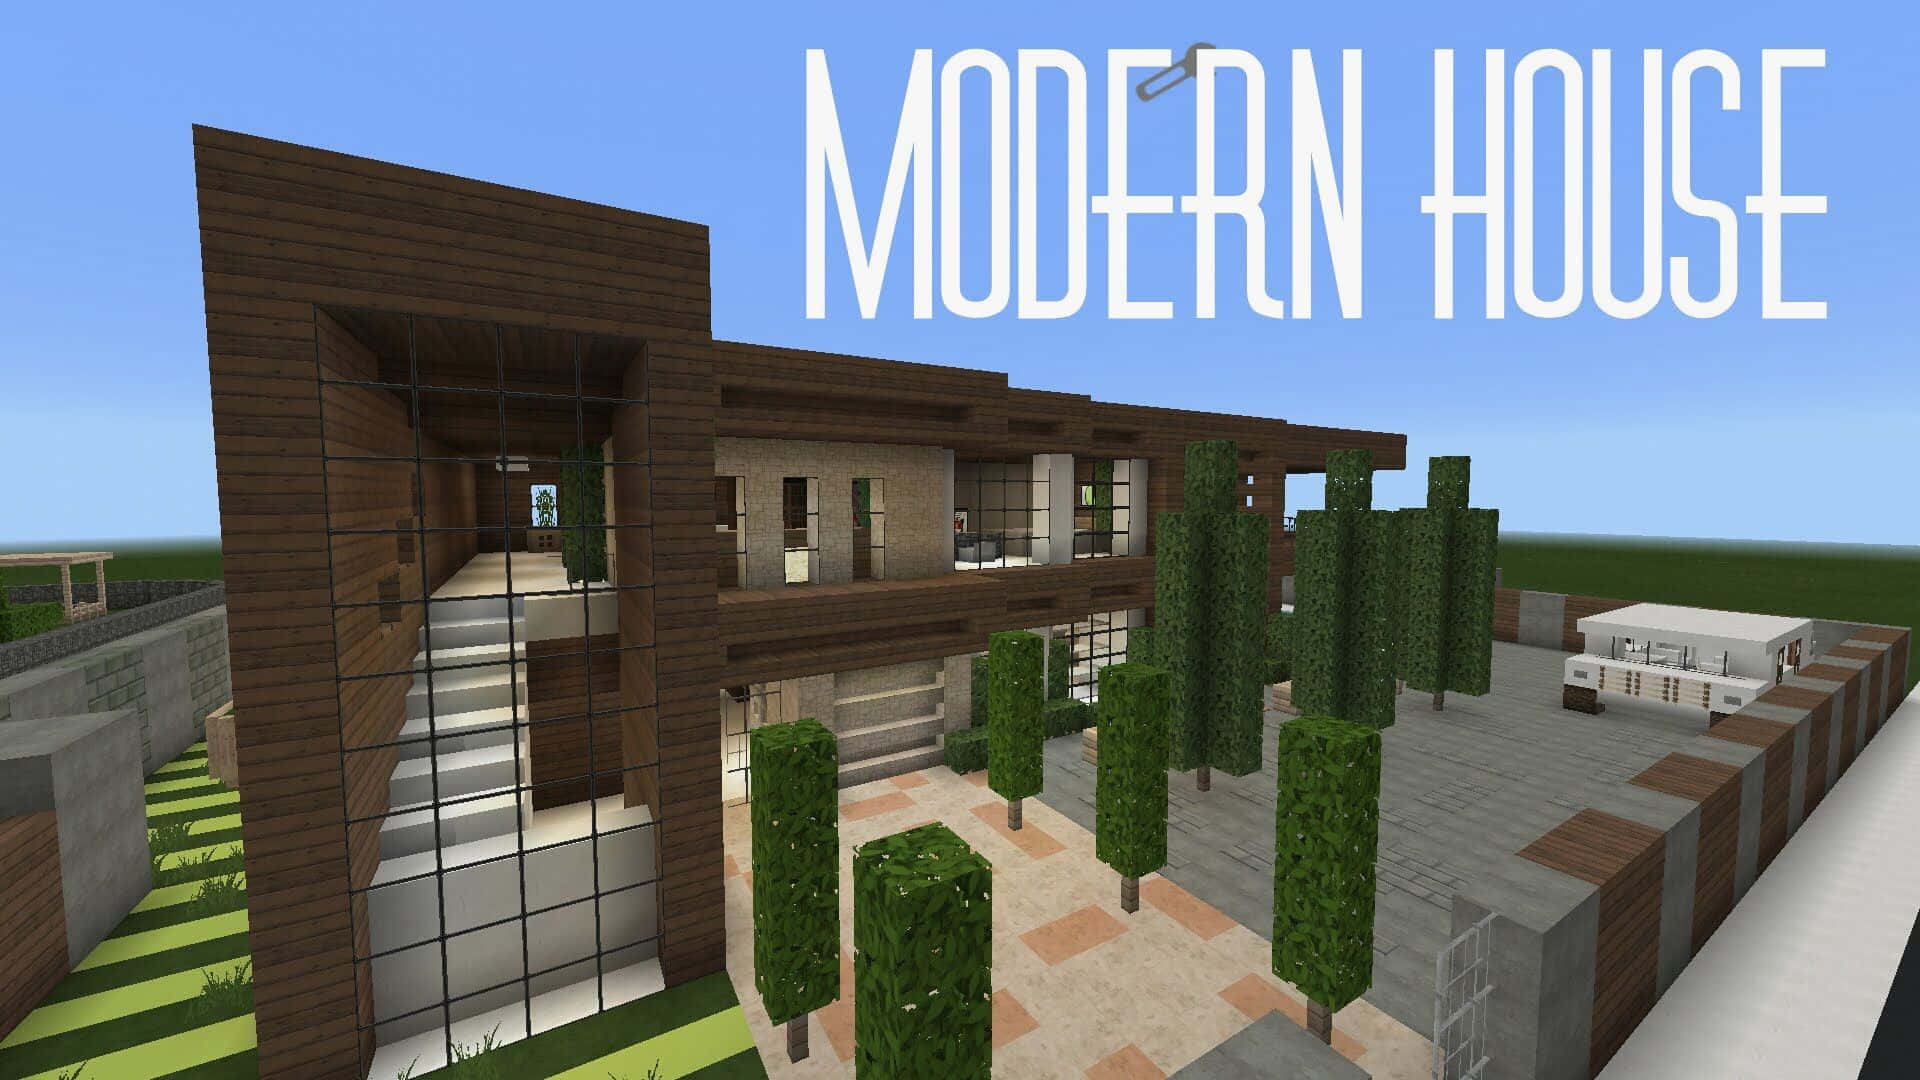 Imagining an Epic Minecraft House